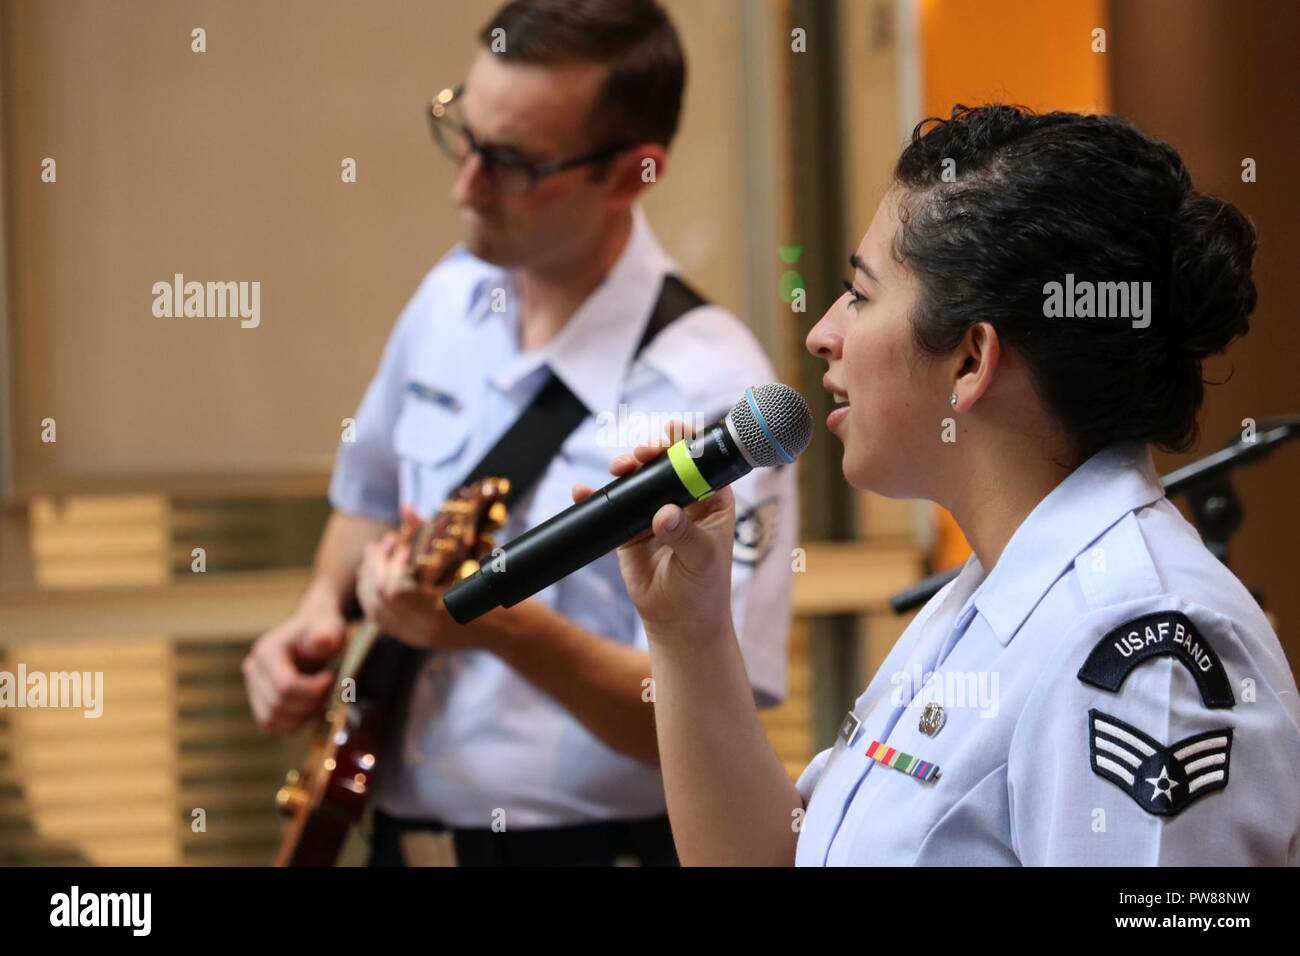 Senior Airman Alycia Cancel, U.S. Air Force Band of Pacific-Asia vocalist, sings during a concert in Saitama, Japan, Sept. 26, 2017. Cancel performs at various locations throughout the Indo-Asia Pacific Region to strengthen the relations with our host nations and to support military ceremonies such as retirements, award ceremonies, graduations, promotions and change of commands, at various schools, parades and sporting events. Stock Photo